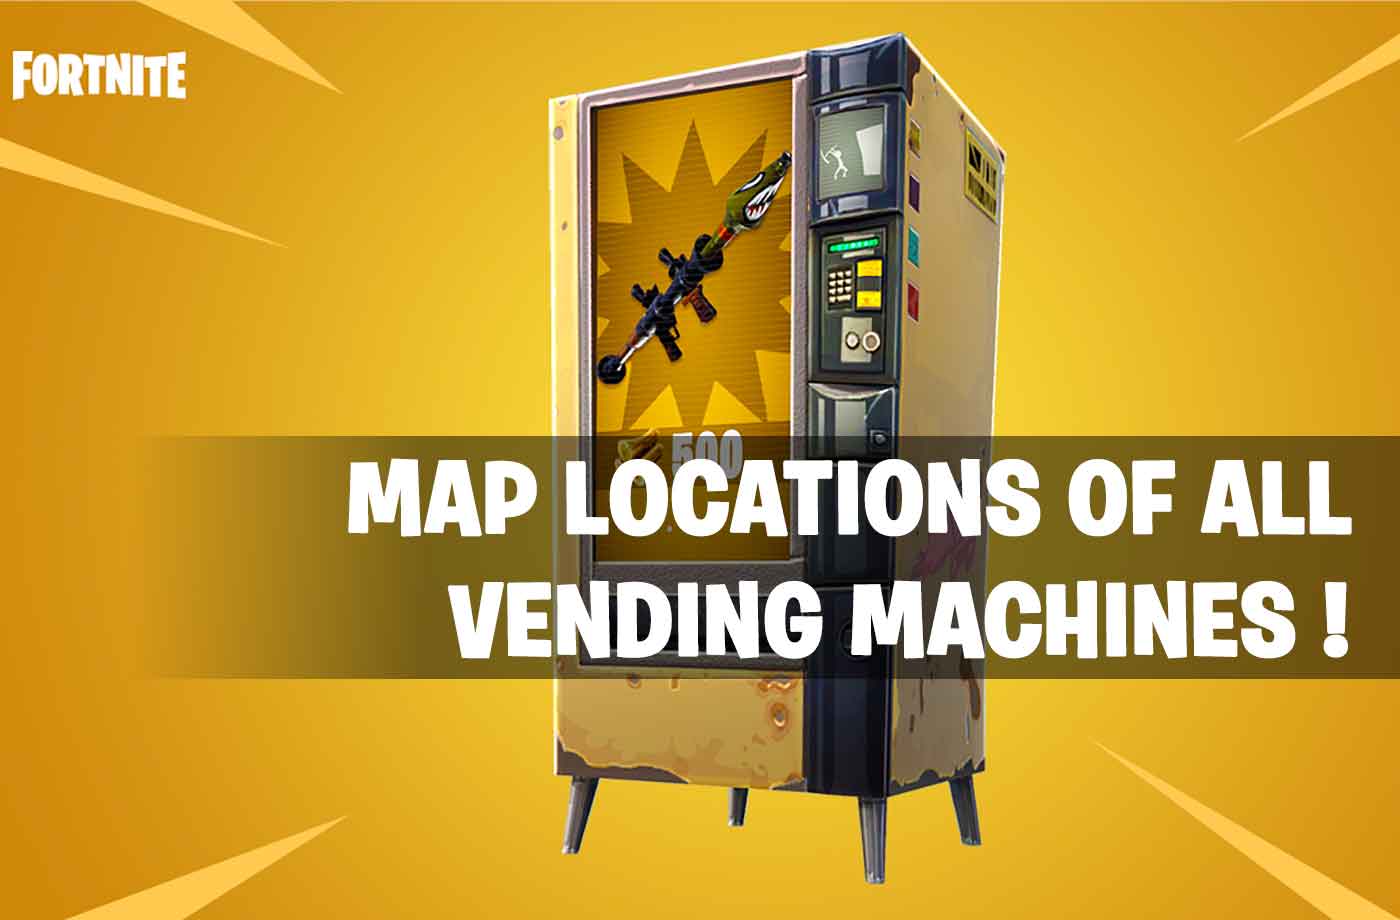 fortnite battle royale map locations of all vending machines - where to find vending machines in fortnite